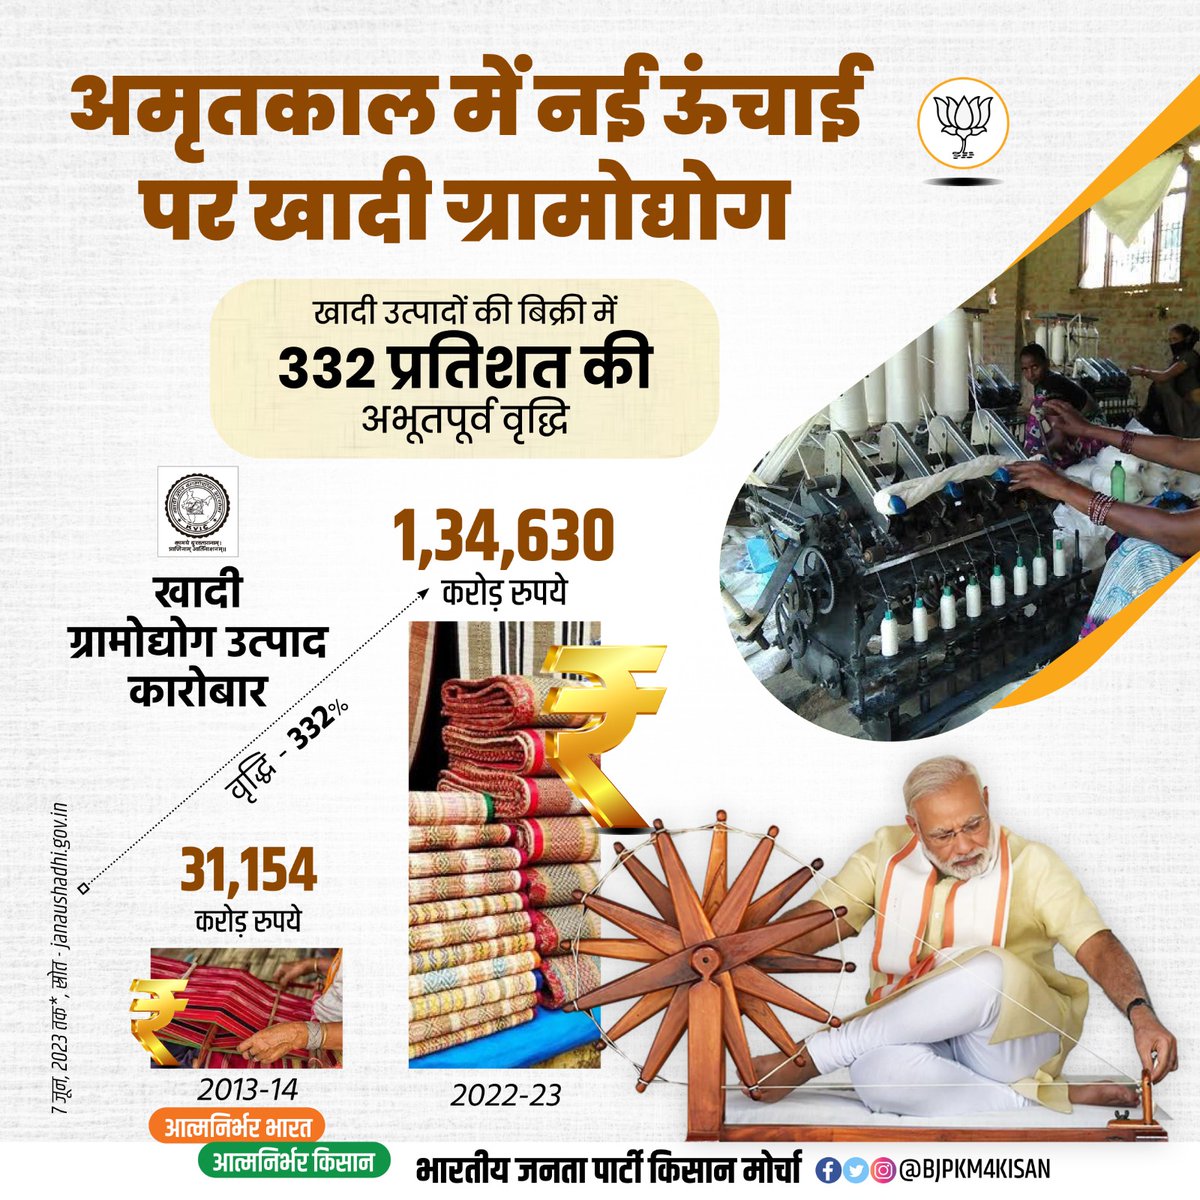 Khadi village industry at a new height in Amritkal.
 An unprecedented growth of 332 percent in the sale of Khadi products.

 #NewIndia #9YearsOfSeva #KhadiIndia